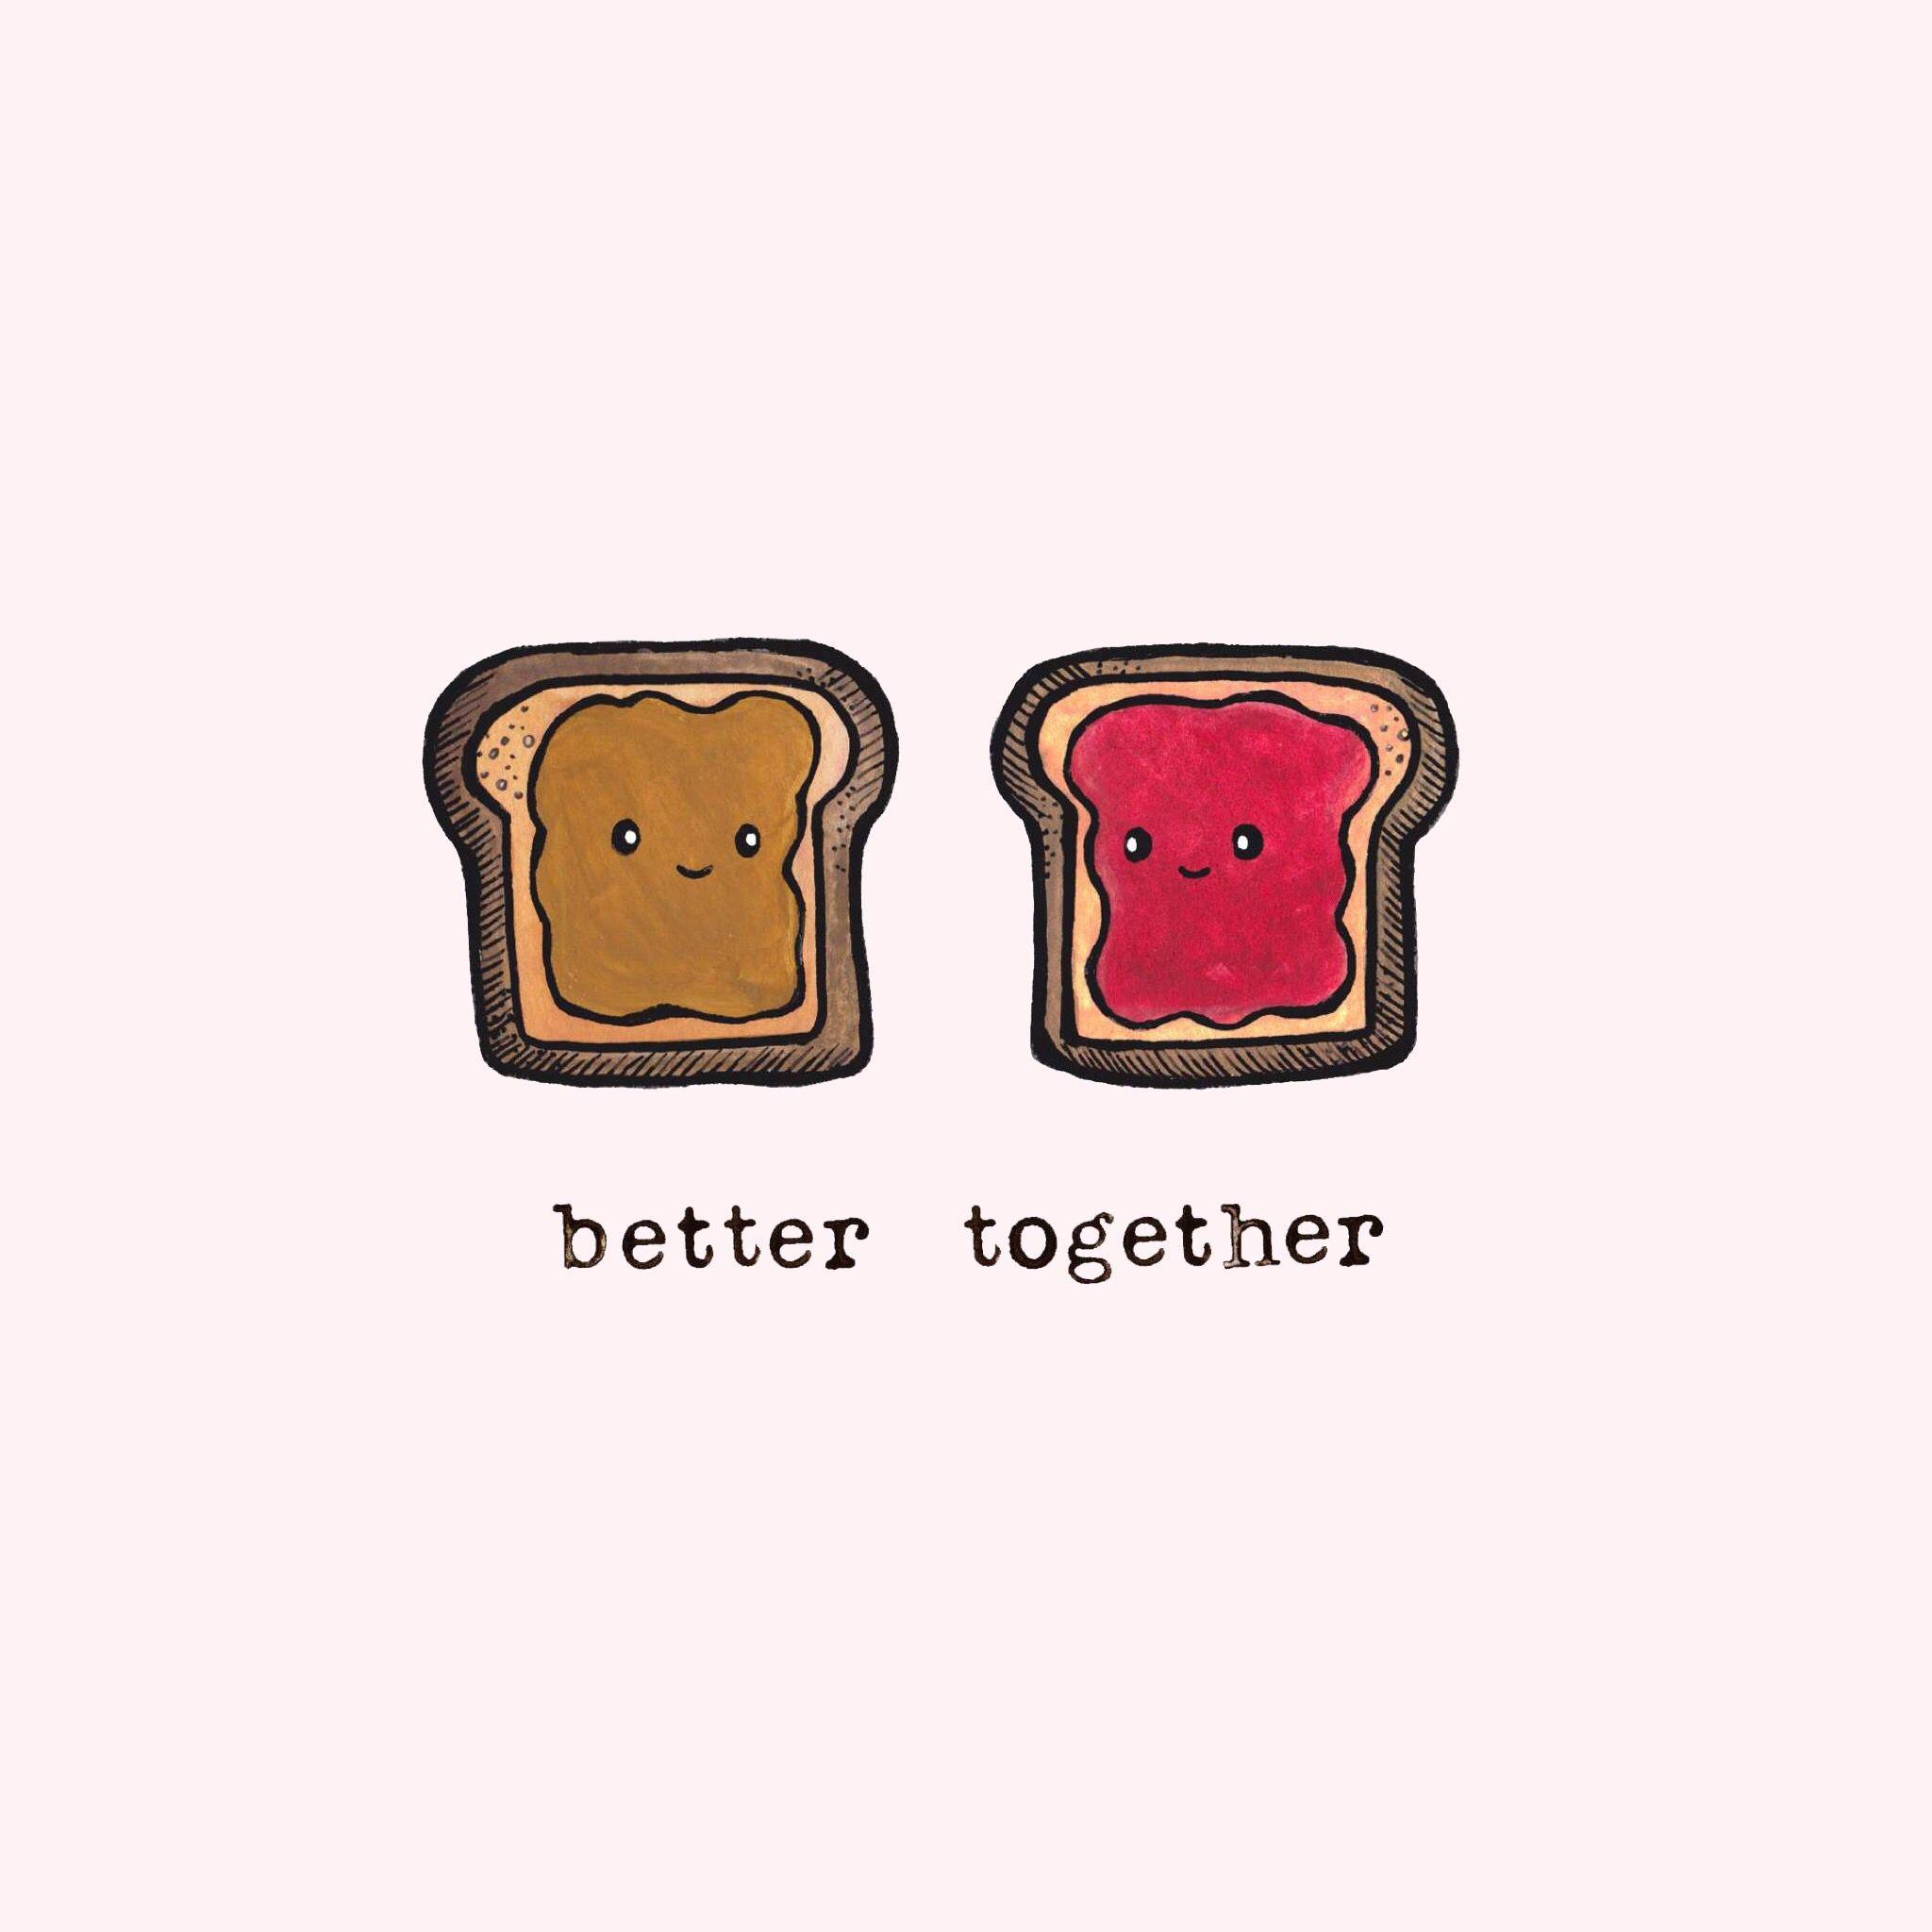 better together butter + jelly. Work. Cute drawings